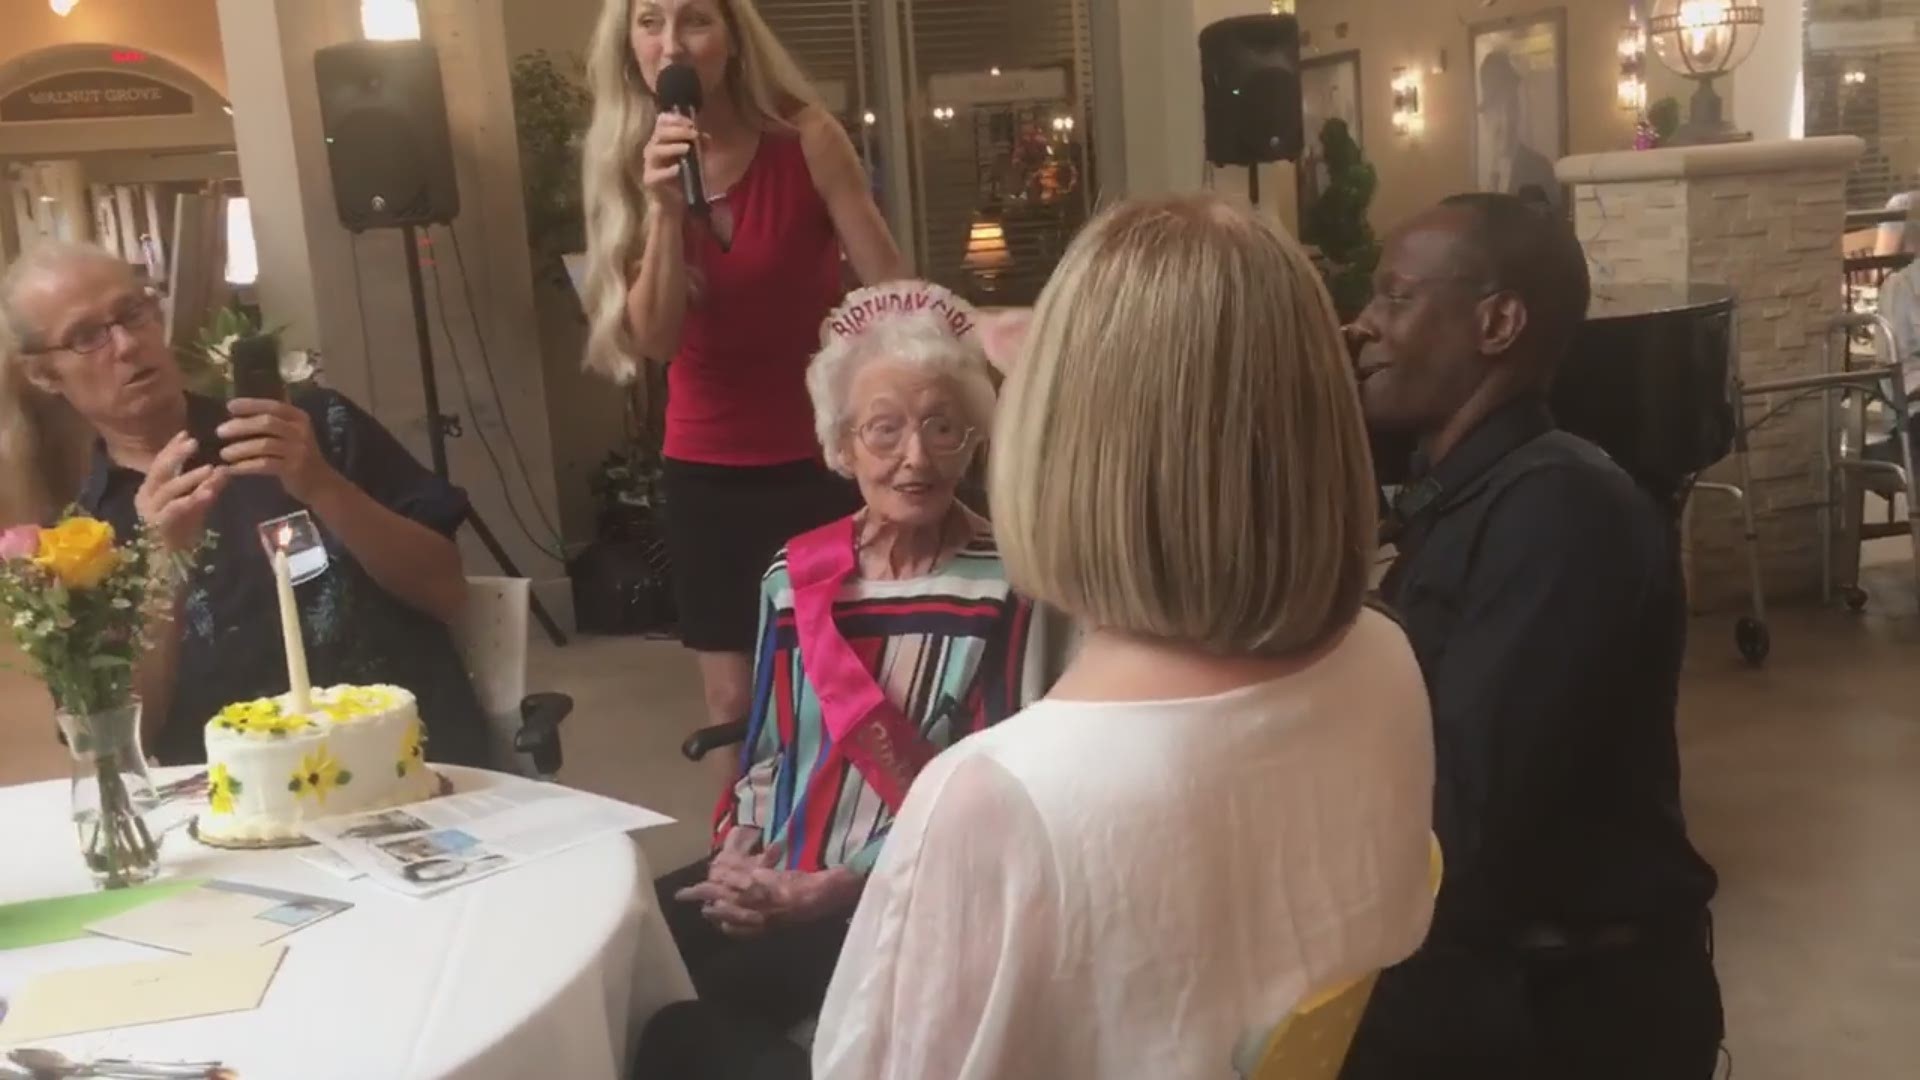 Sybil Peacock Harmon, who was a member of Delta Air Lines' first class of flight attendants, turned 103 on July 9.(Video courtesy Celebration Village Acworth)